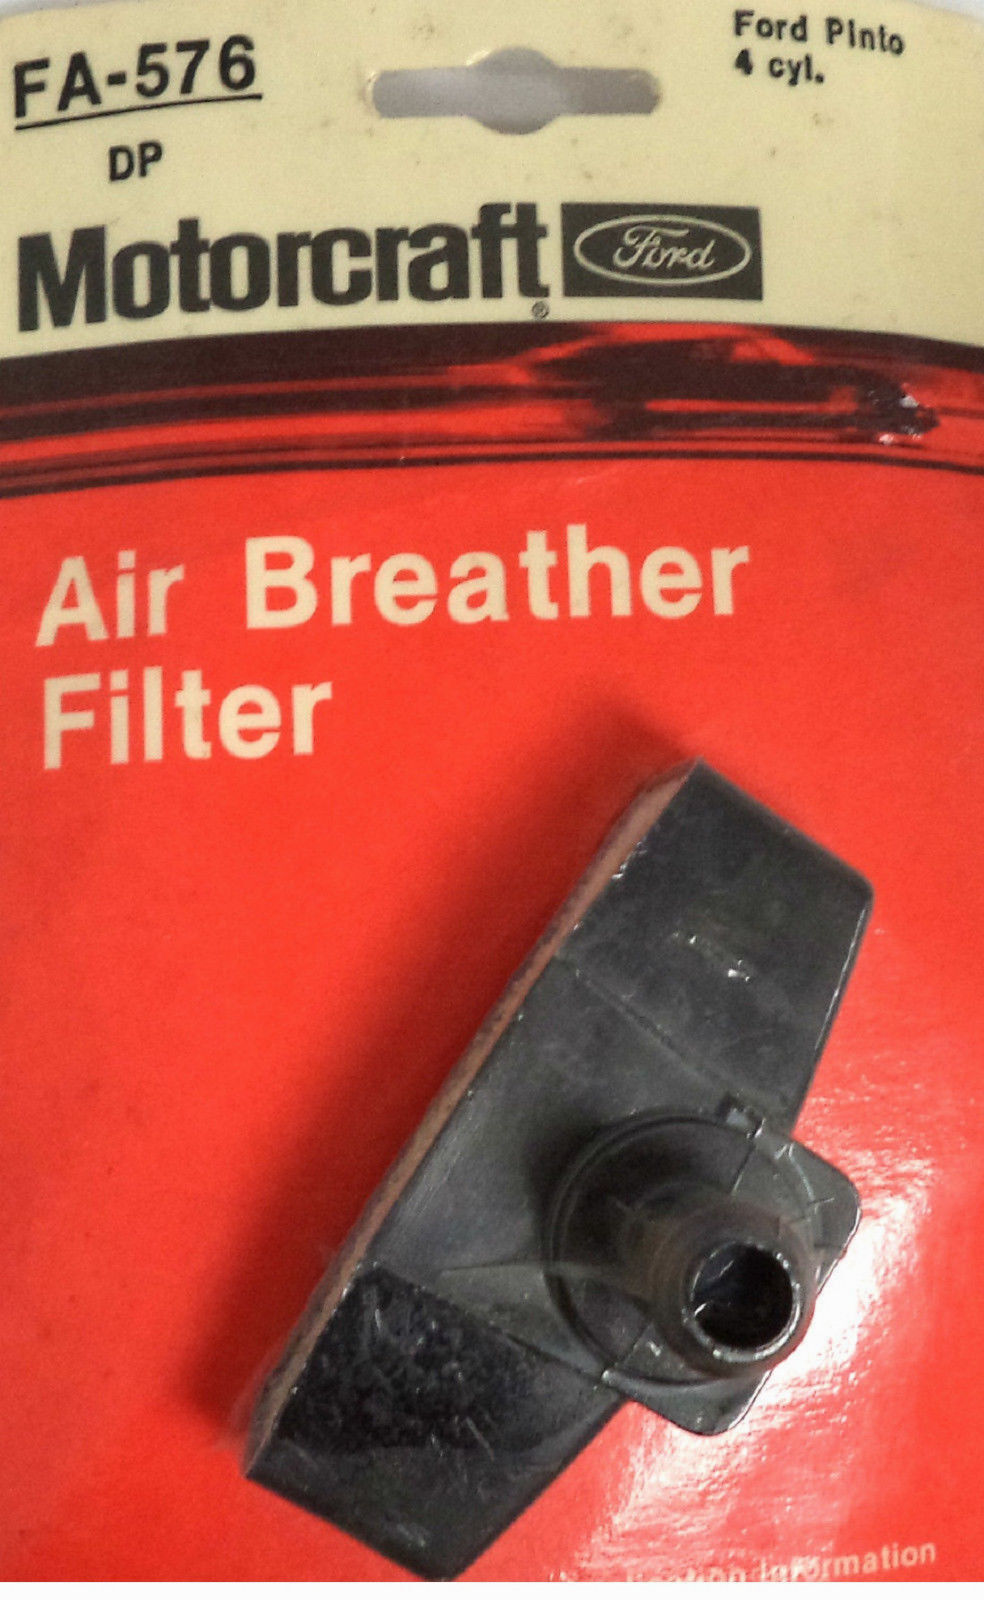 Ford Motorcraft FA-576 FA576 Air Breather Filter Pinto 4 Cyl